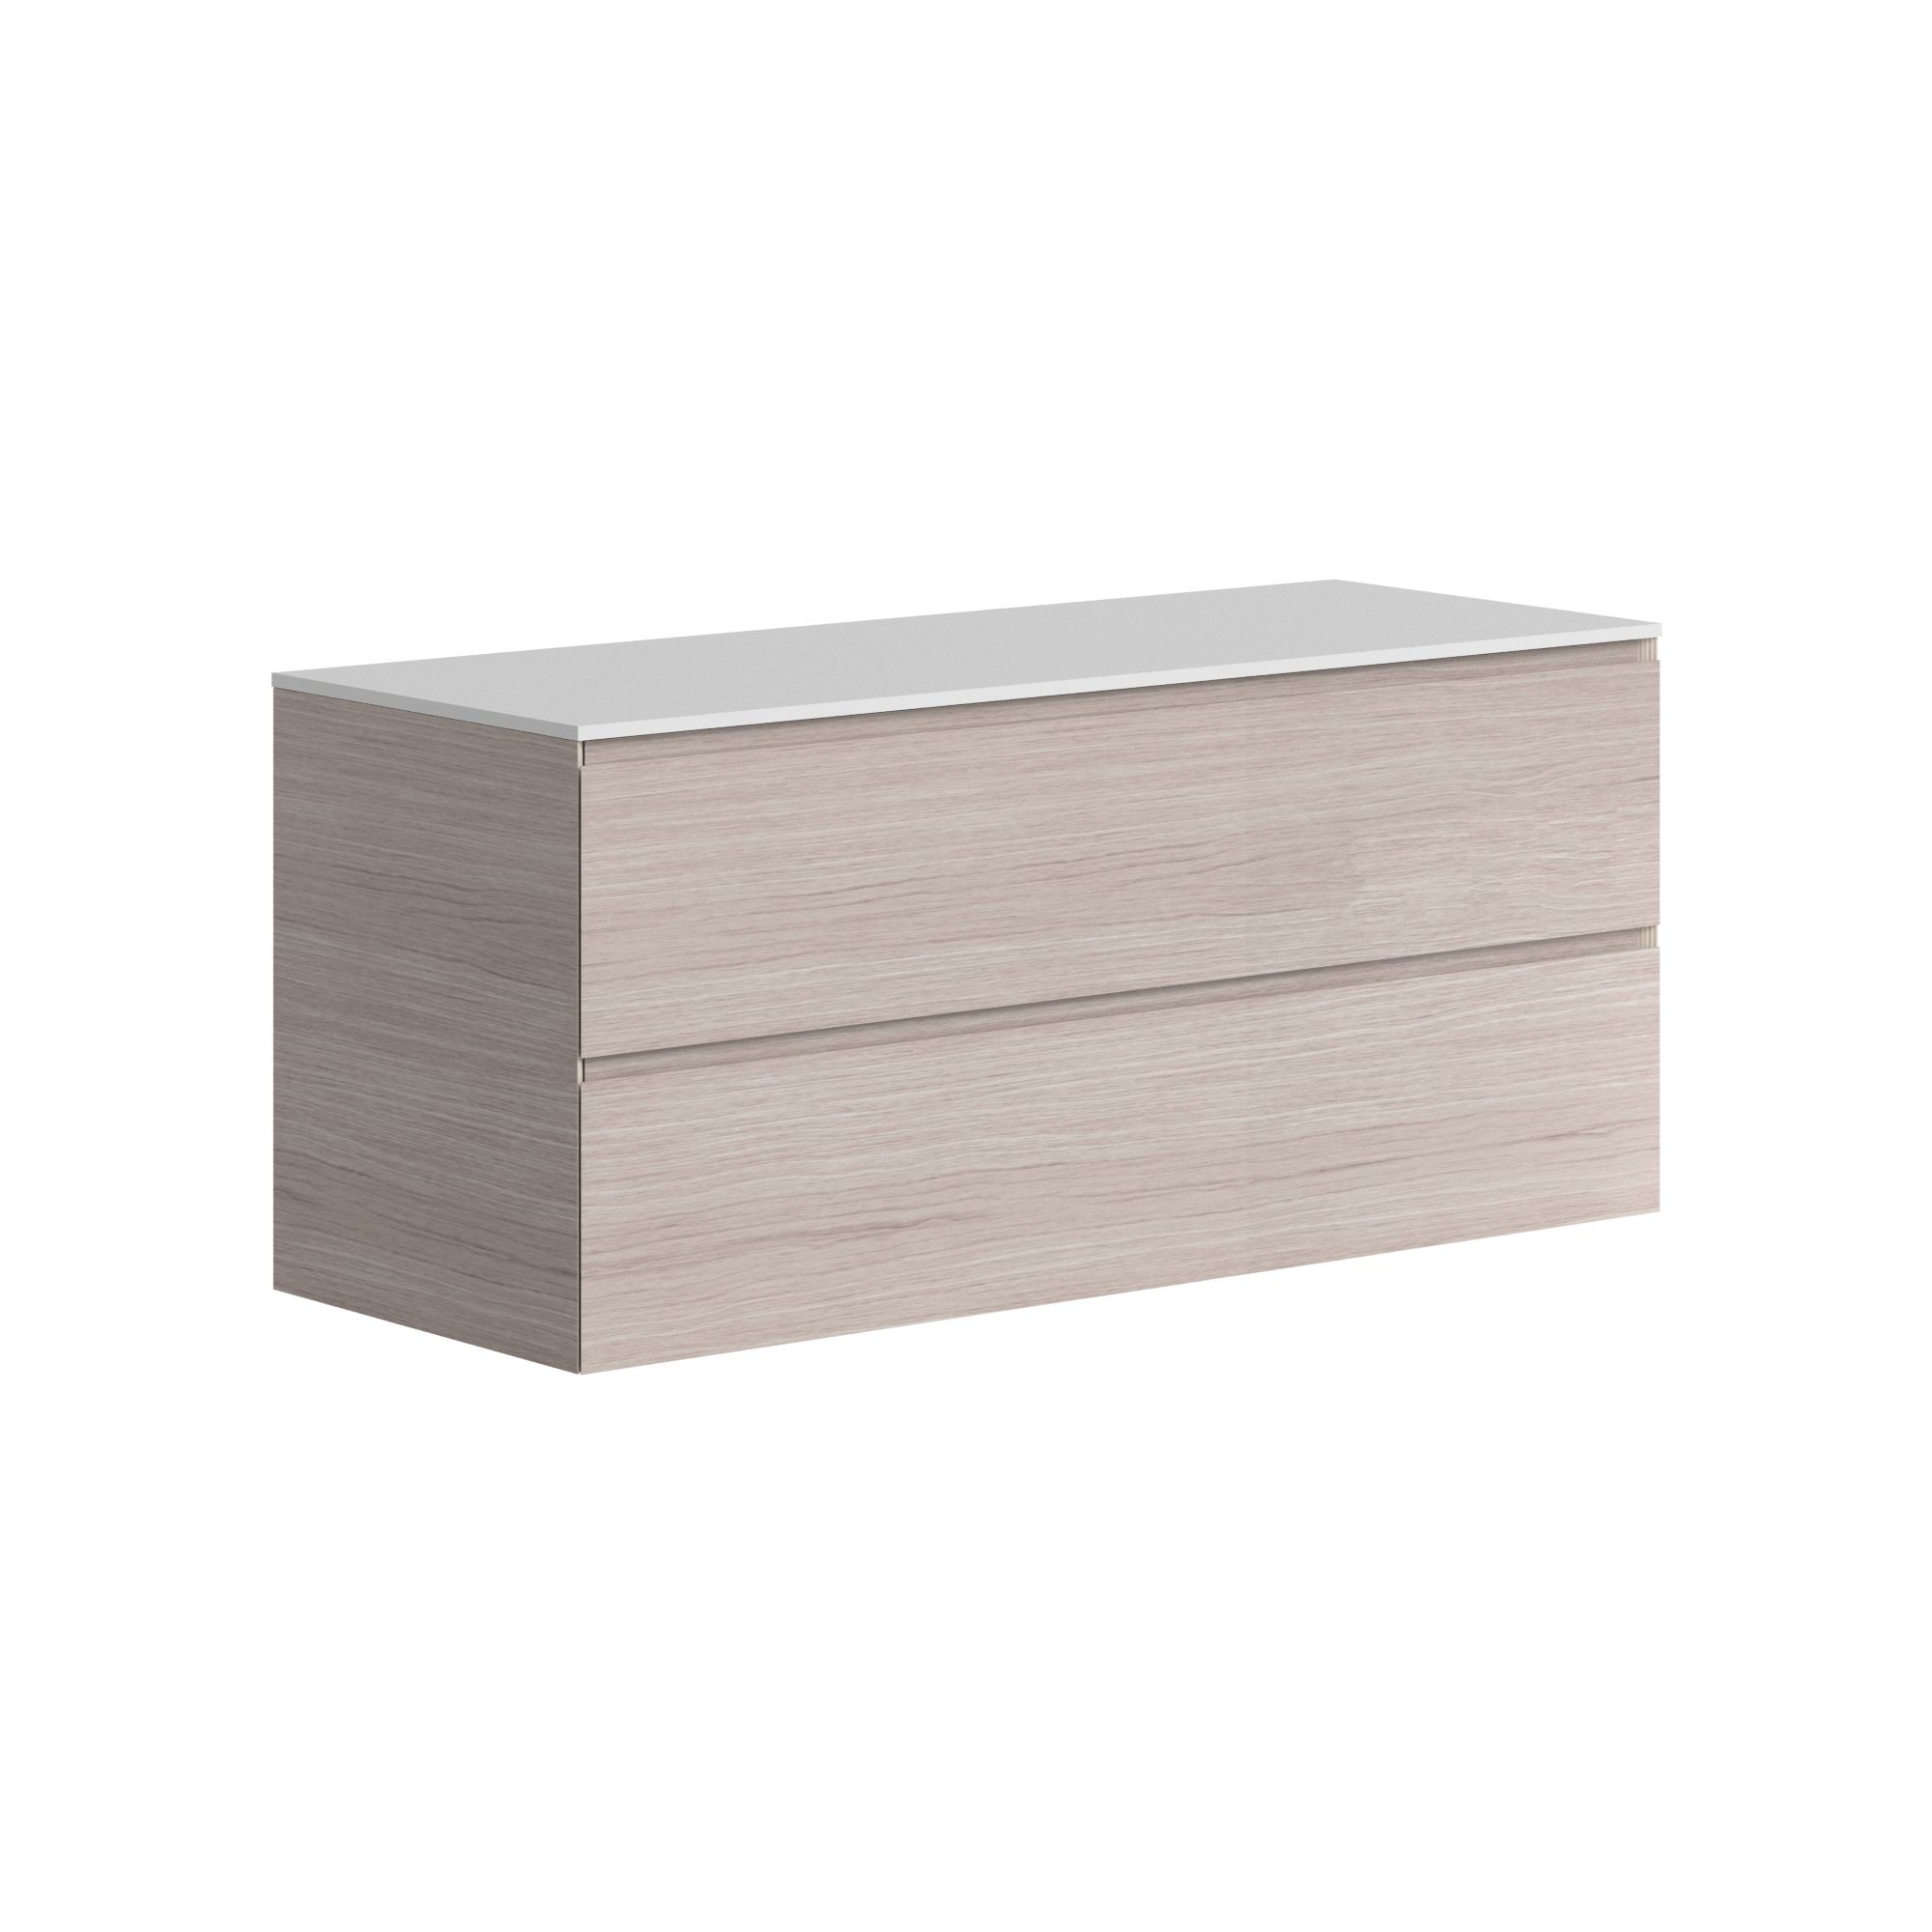 The Ellery Auxiliary Pull Open Unit 1200x520mm with Solid Surface Countertop